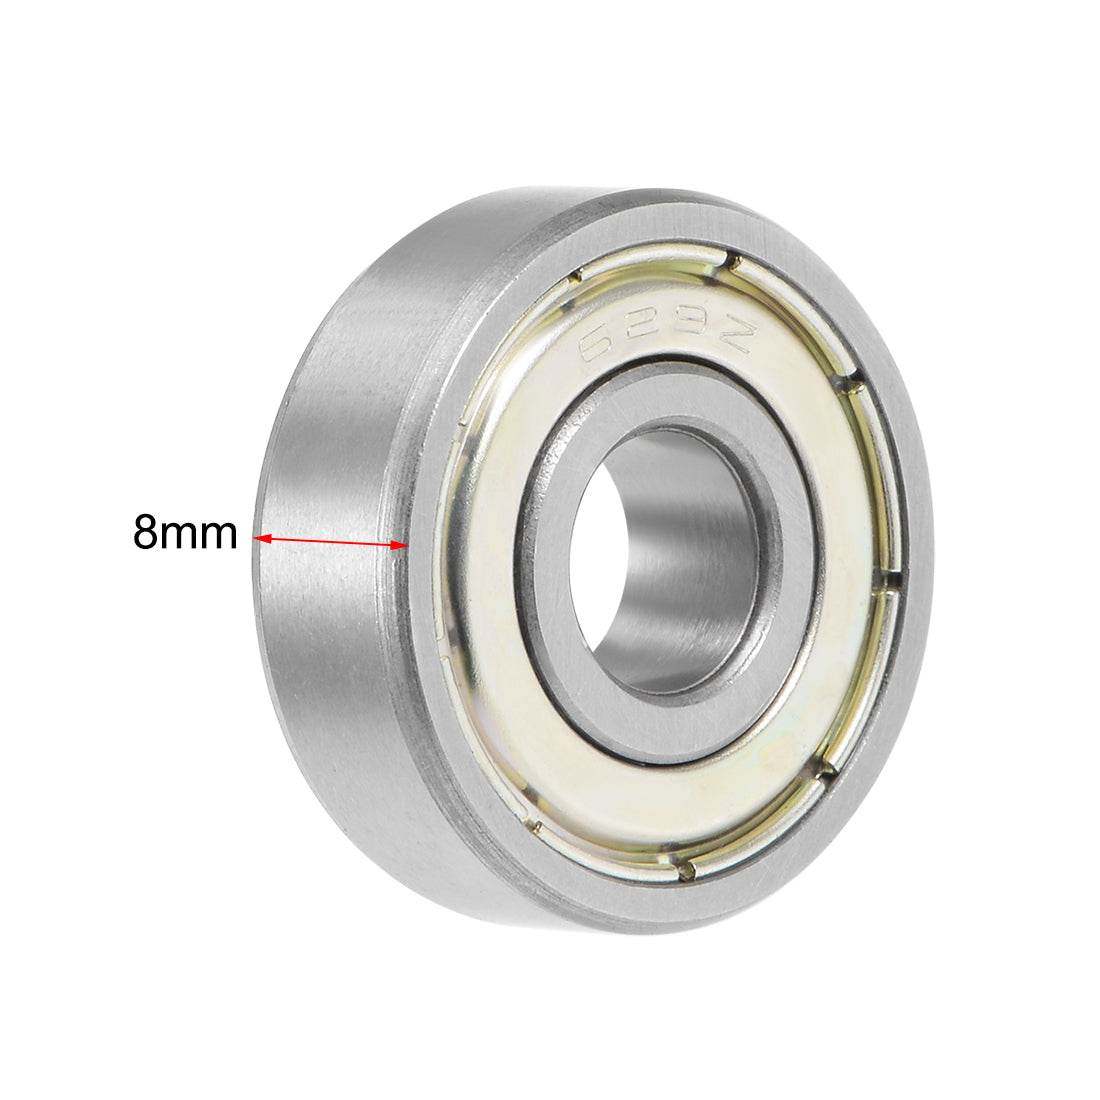 uxcell Uxcell Deep Groove Ball Bearing Double Shielded Chrome Metric Bearings